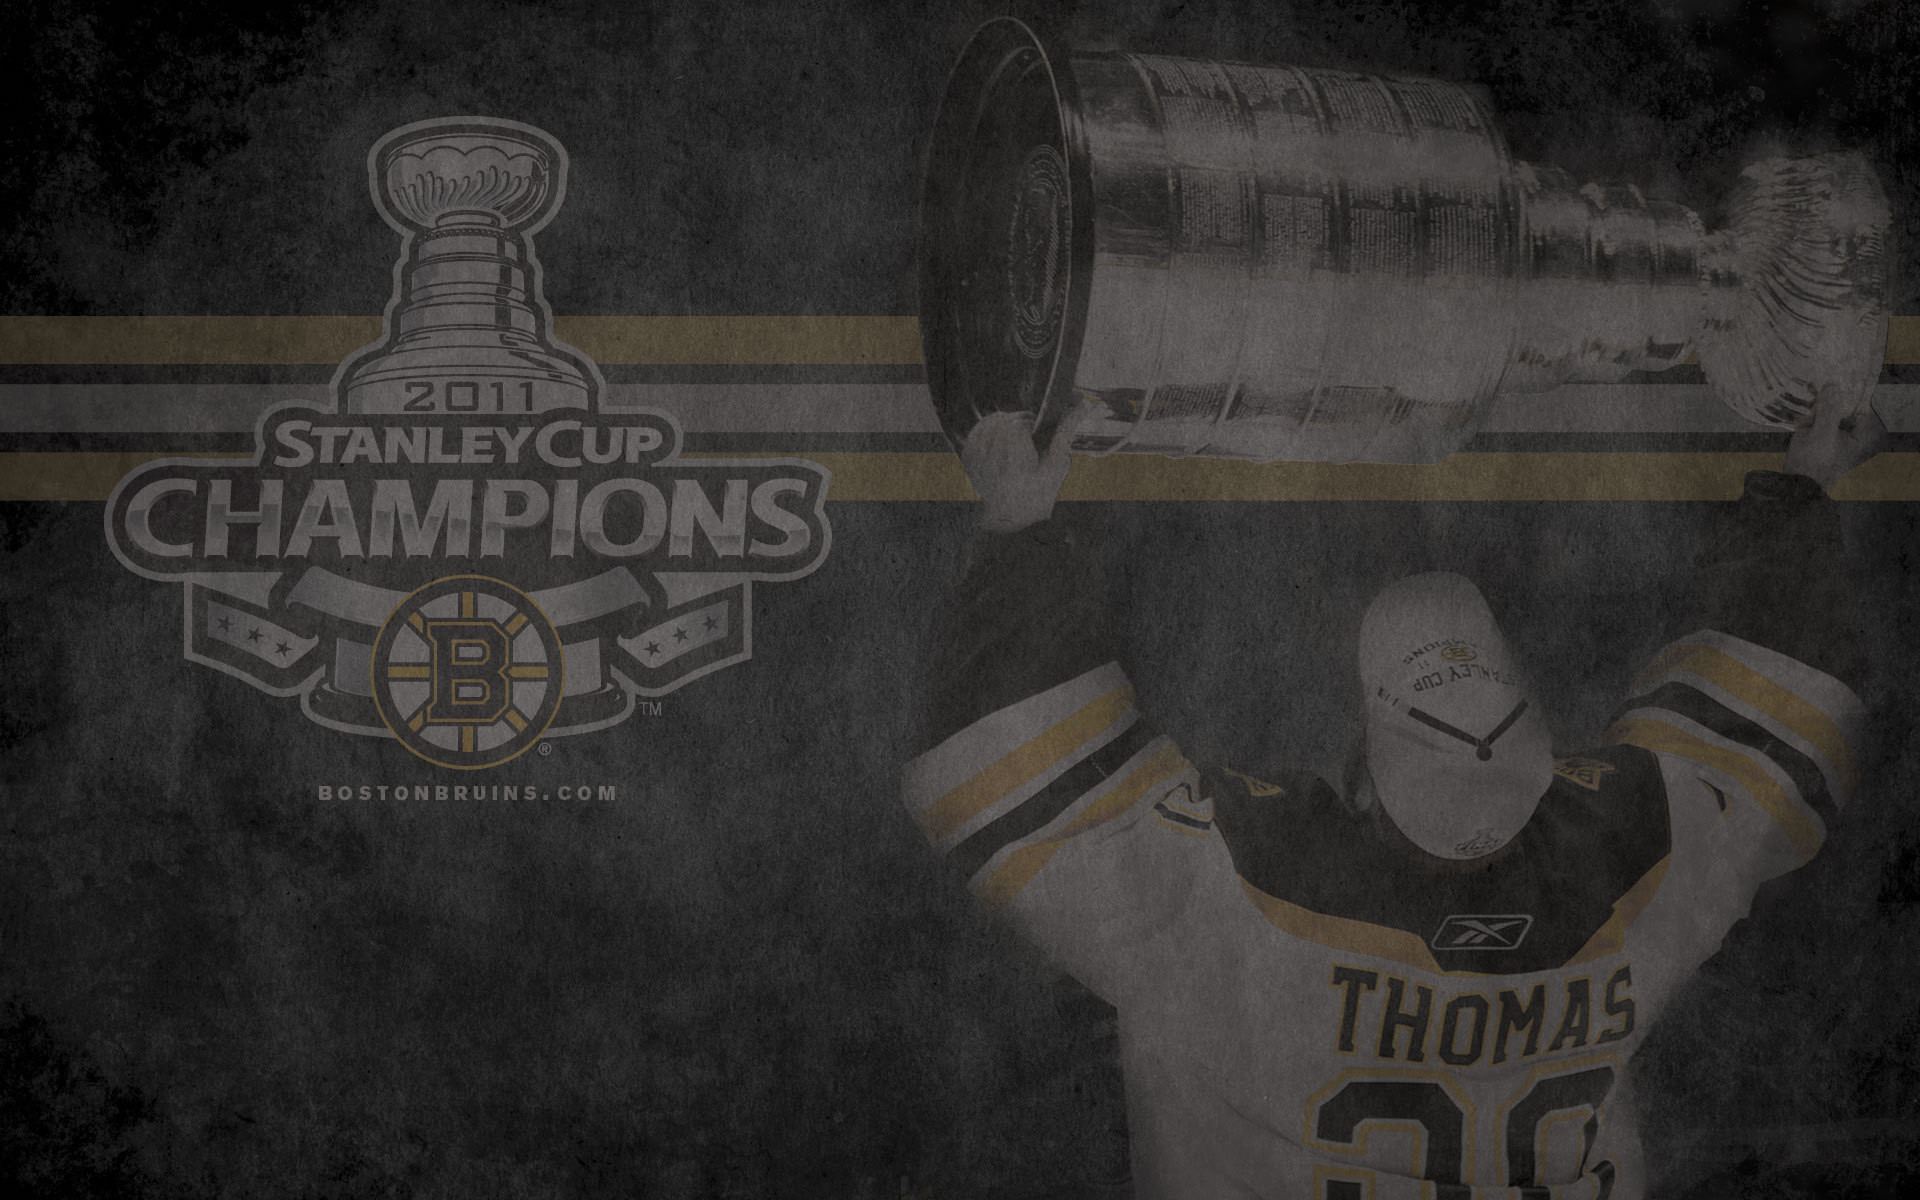 1920x1200 Boston Bruins images Stanley Cup Champions: Tim Thomas HD wallpaper and  background photos